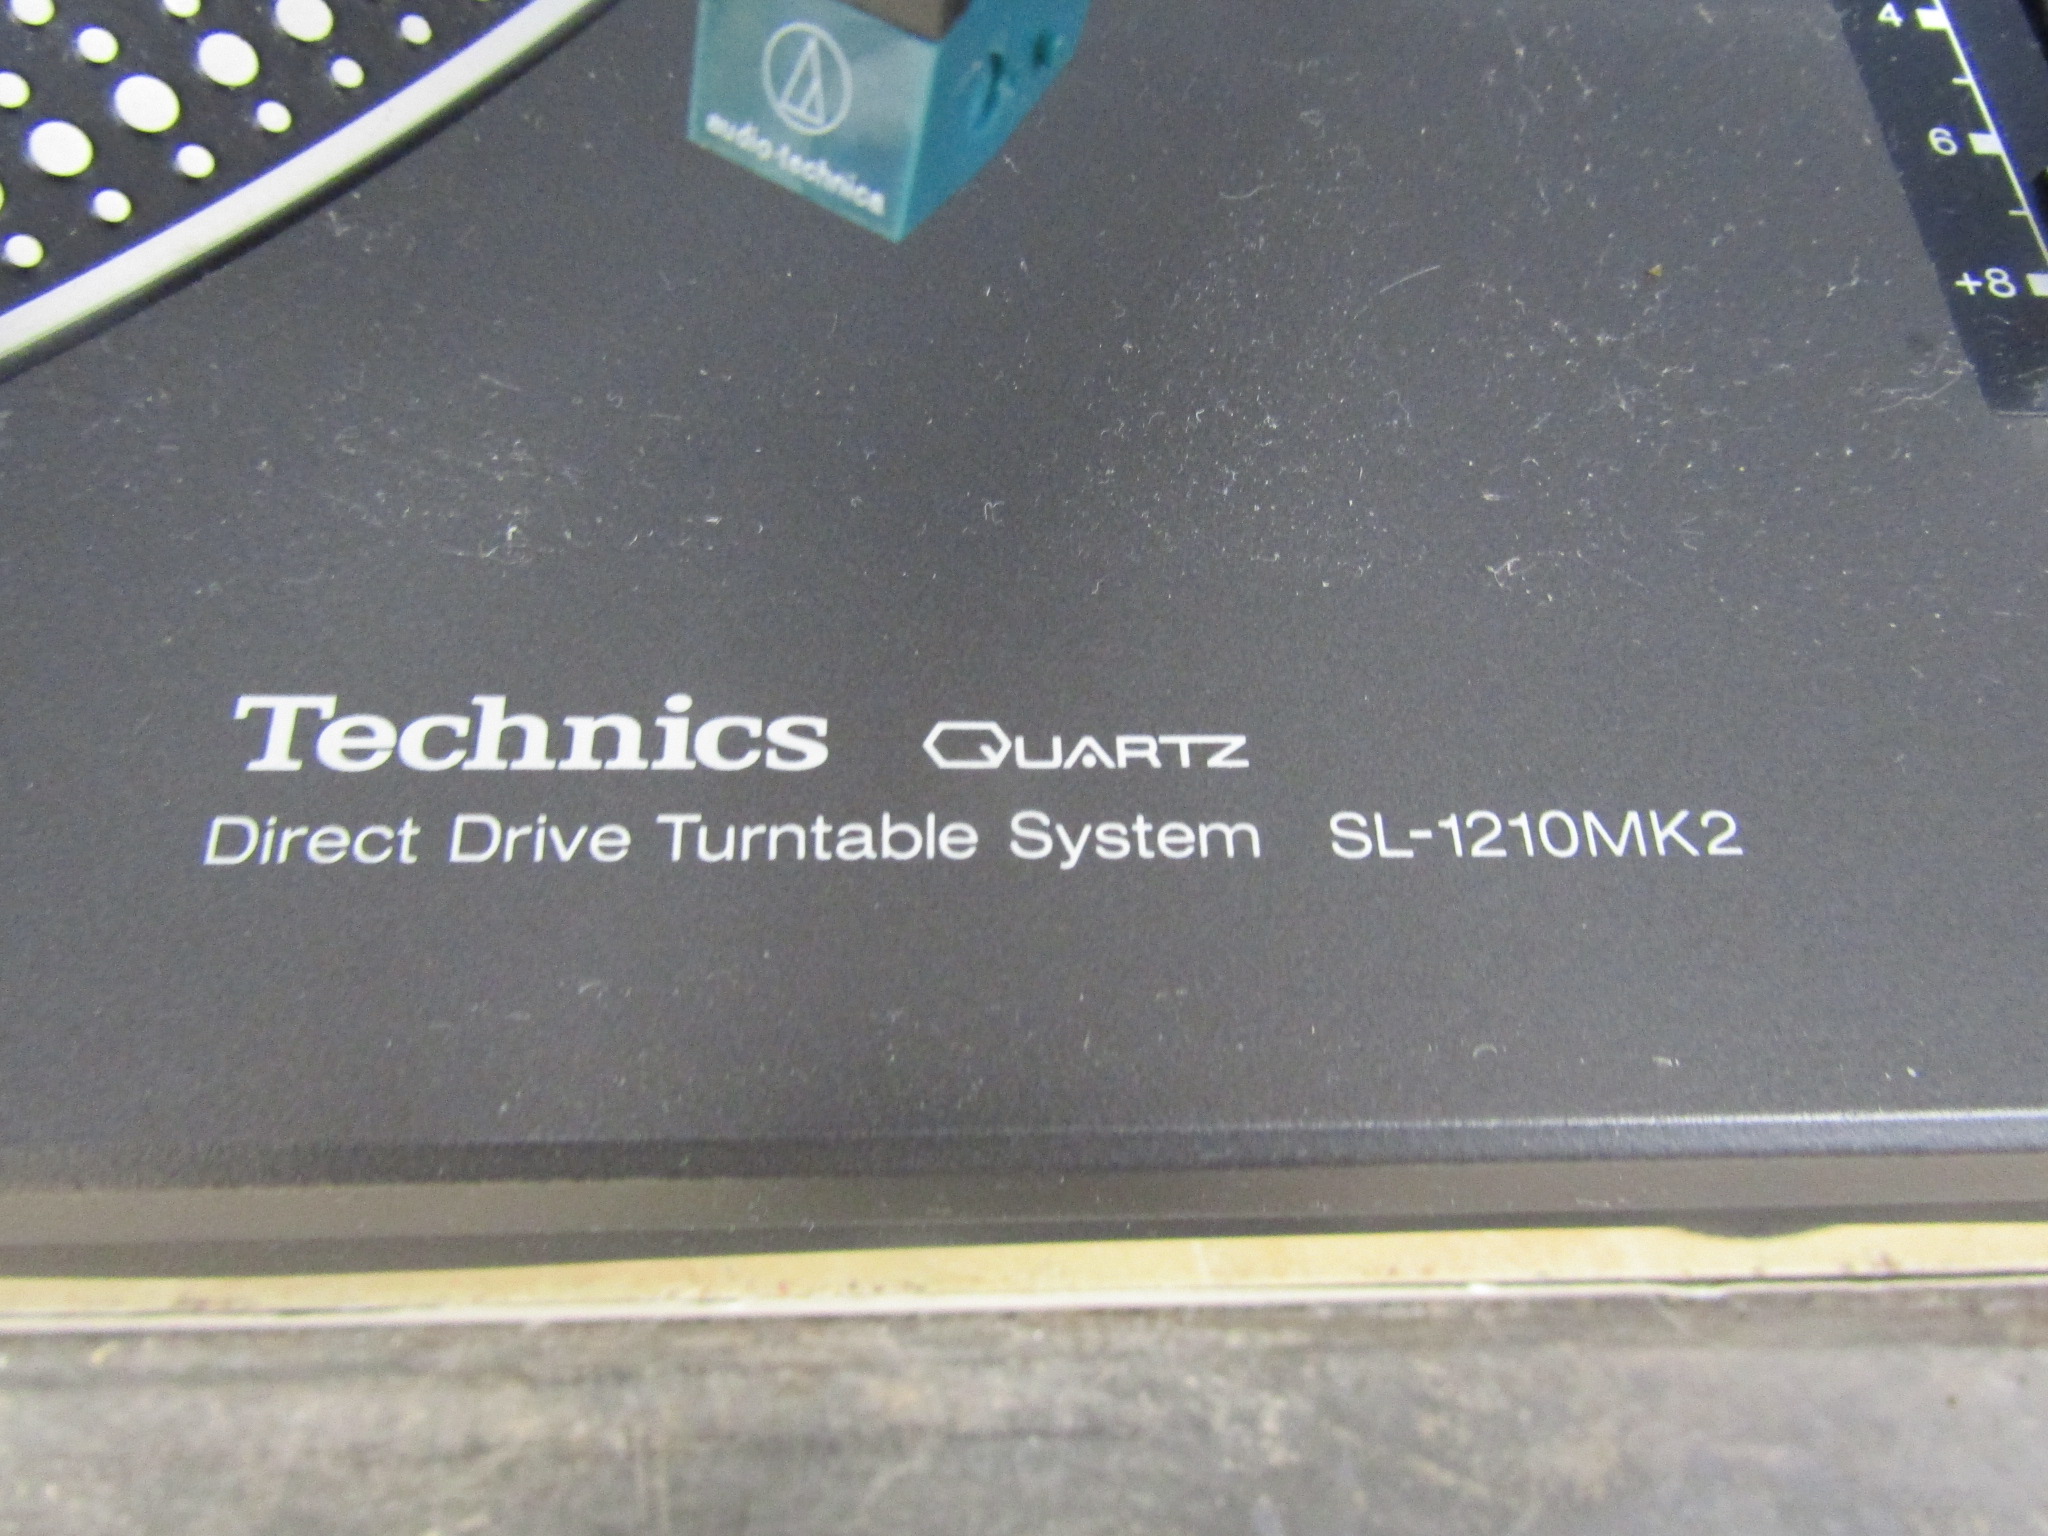 Technics Quartz SL-1210 MK2 direct drive turntable system with manual from a house clearance - Image 5 of 8